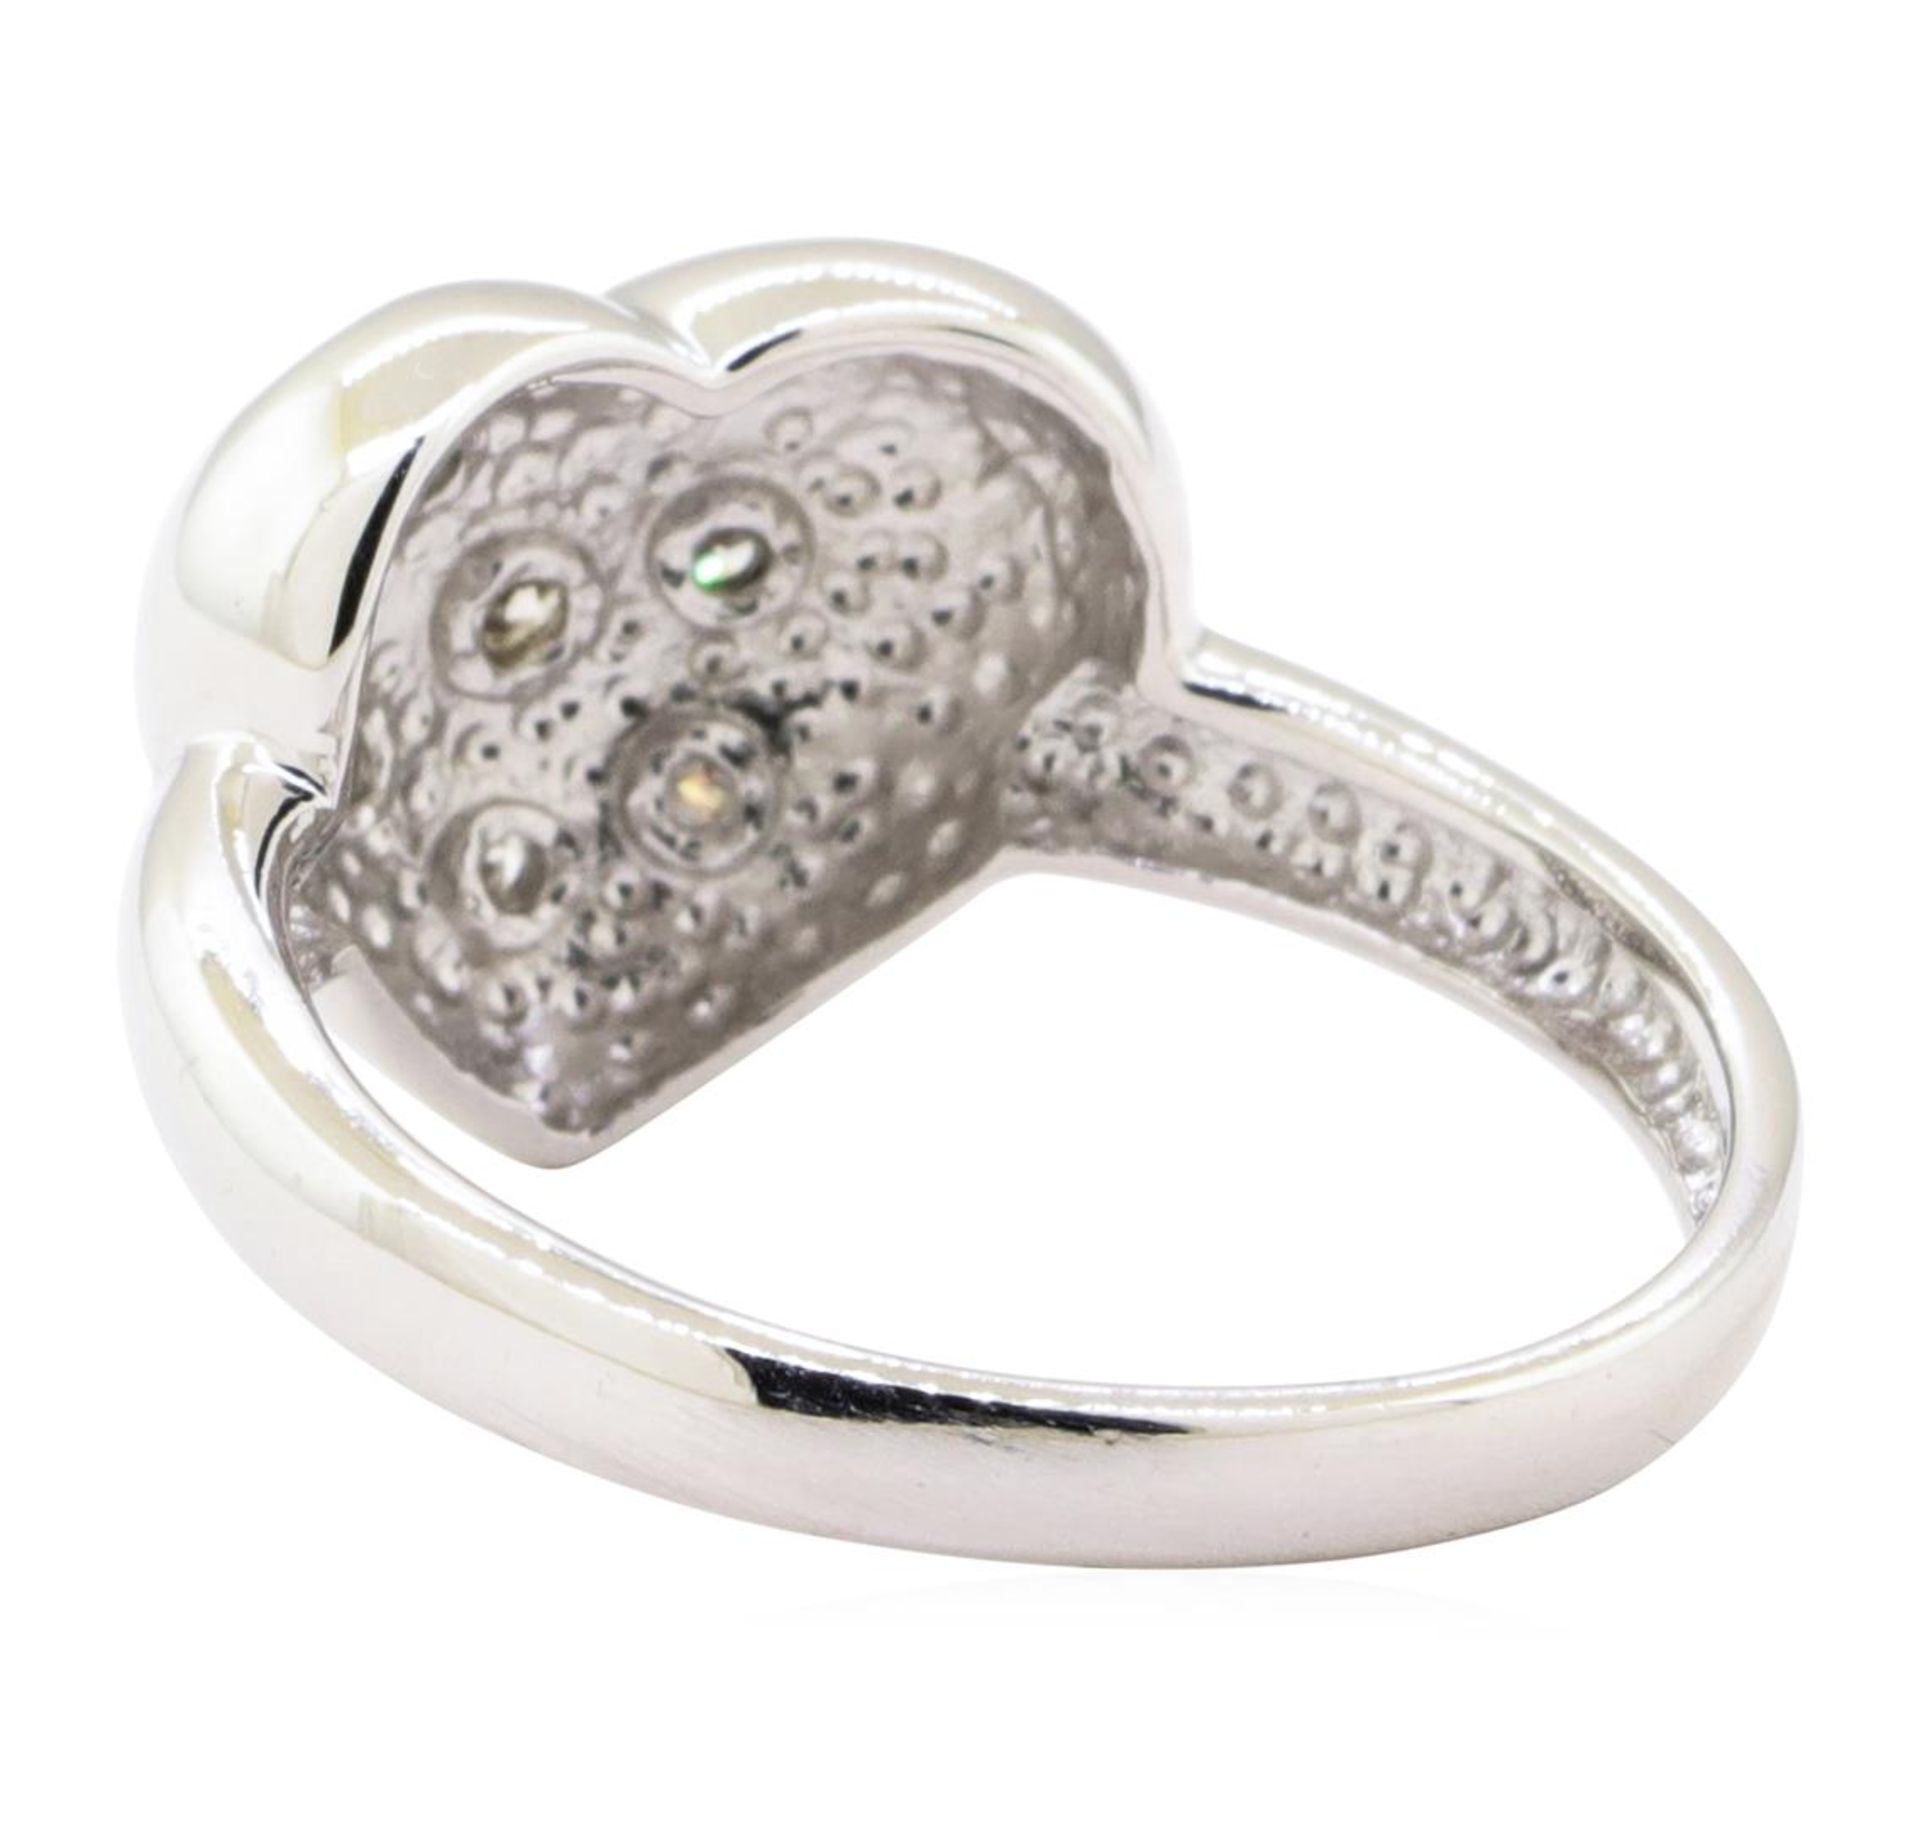 0.20 ctw Diamond Heart Shaped Ring - 14KT White Gold - Image 3 of 4